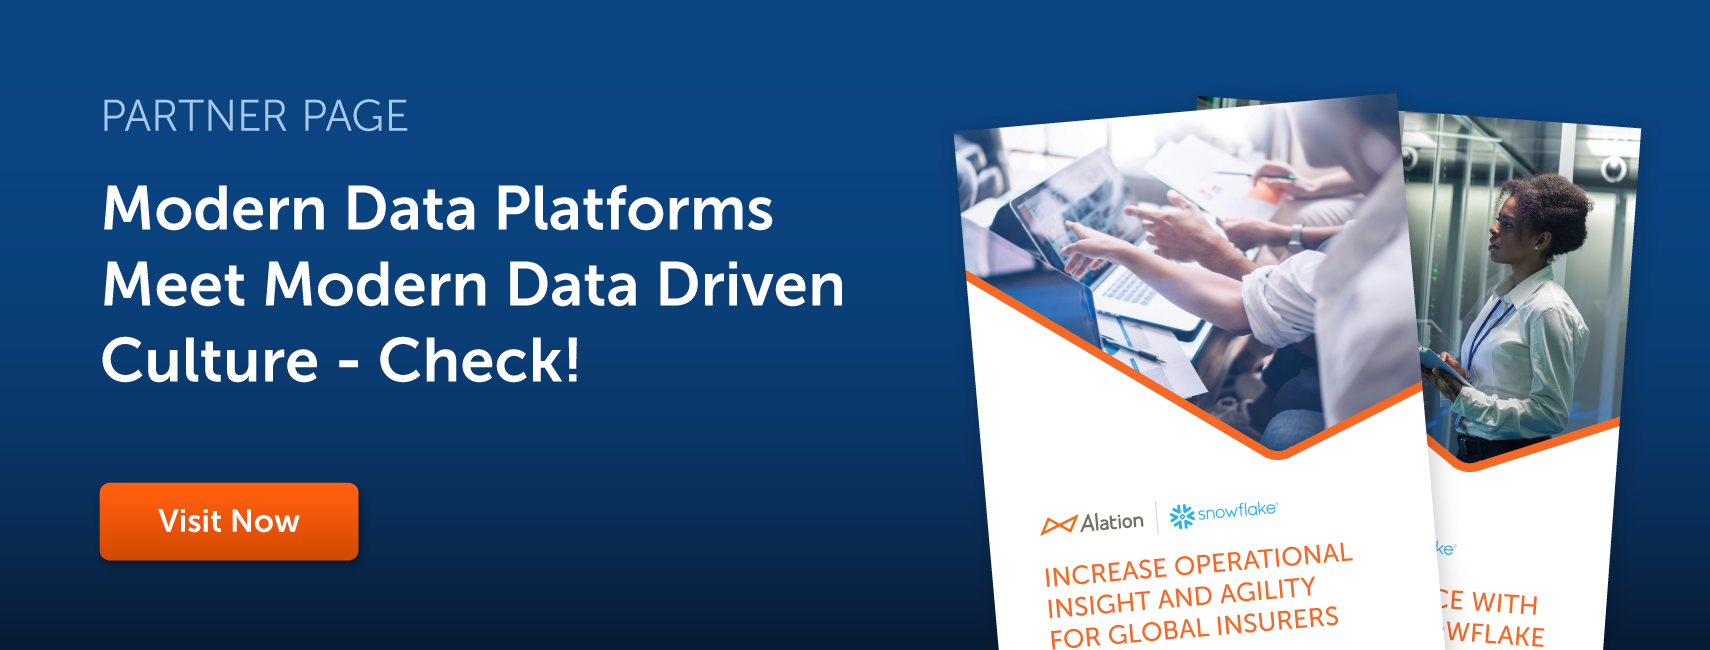 The Catalog is the Platform for Data Intelligence white paper